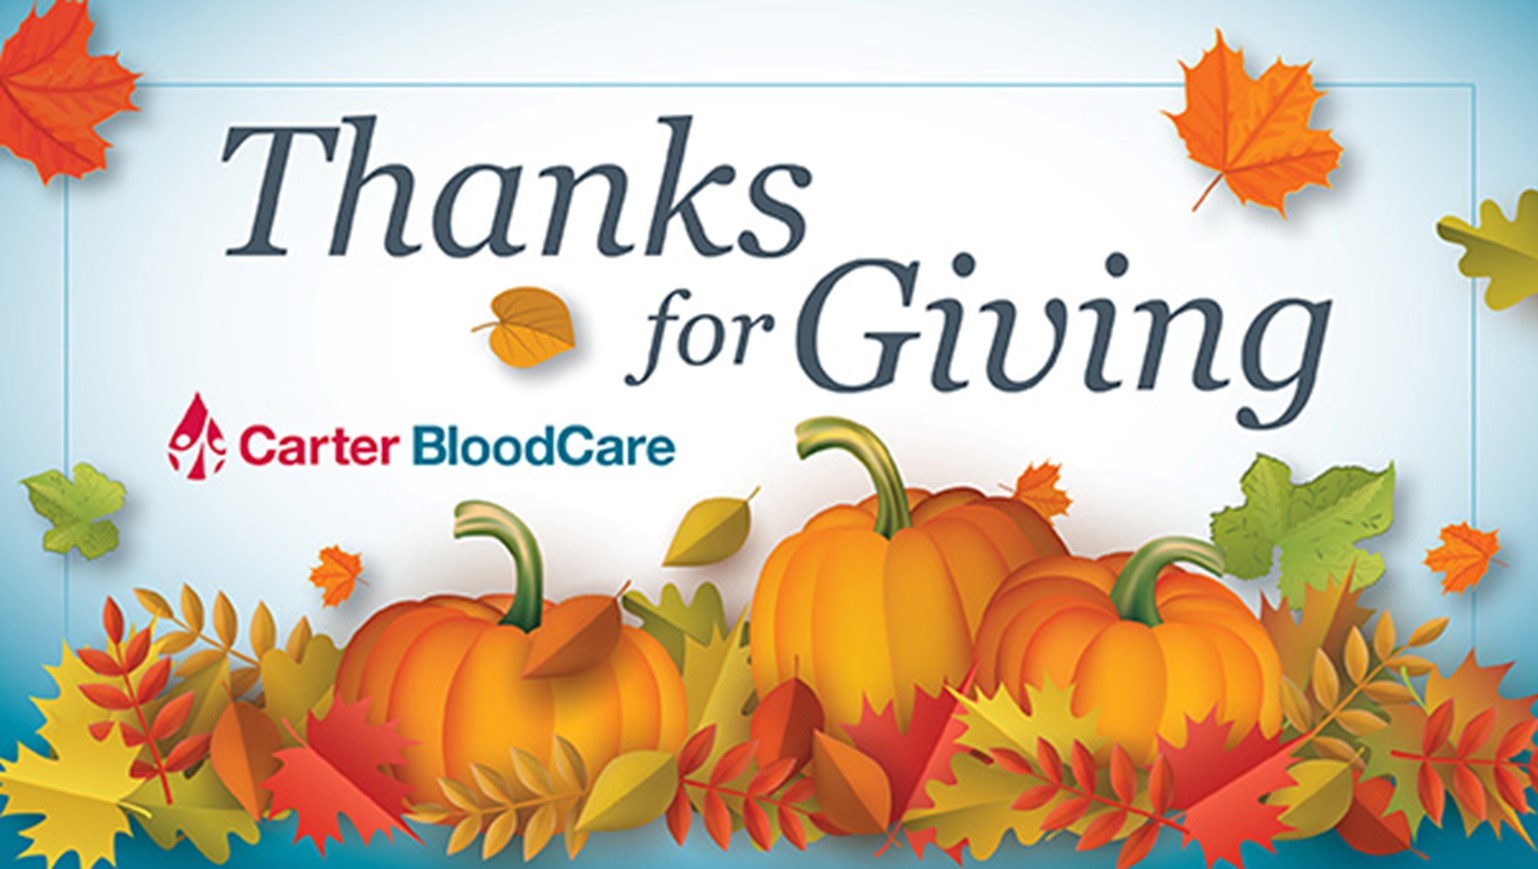 Get rewarded during Carter BloodCare’s Thanks for Giving blood drive